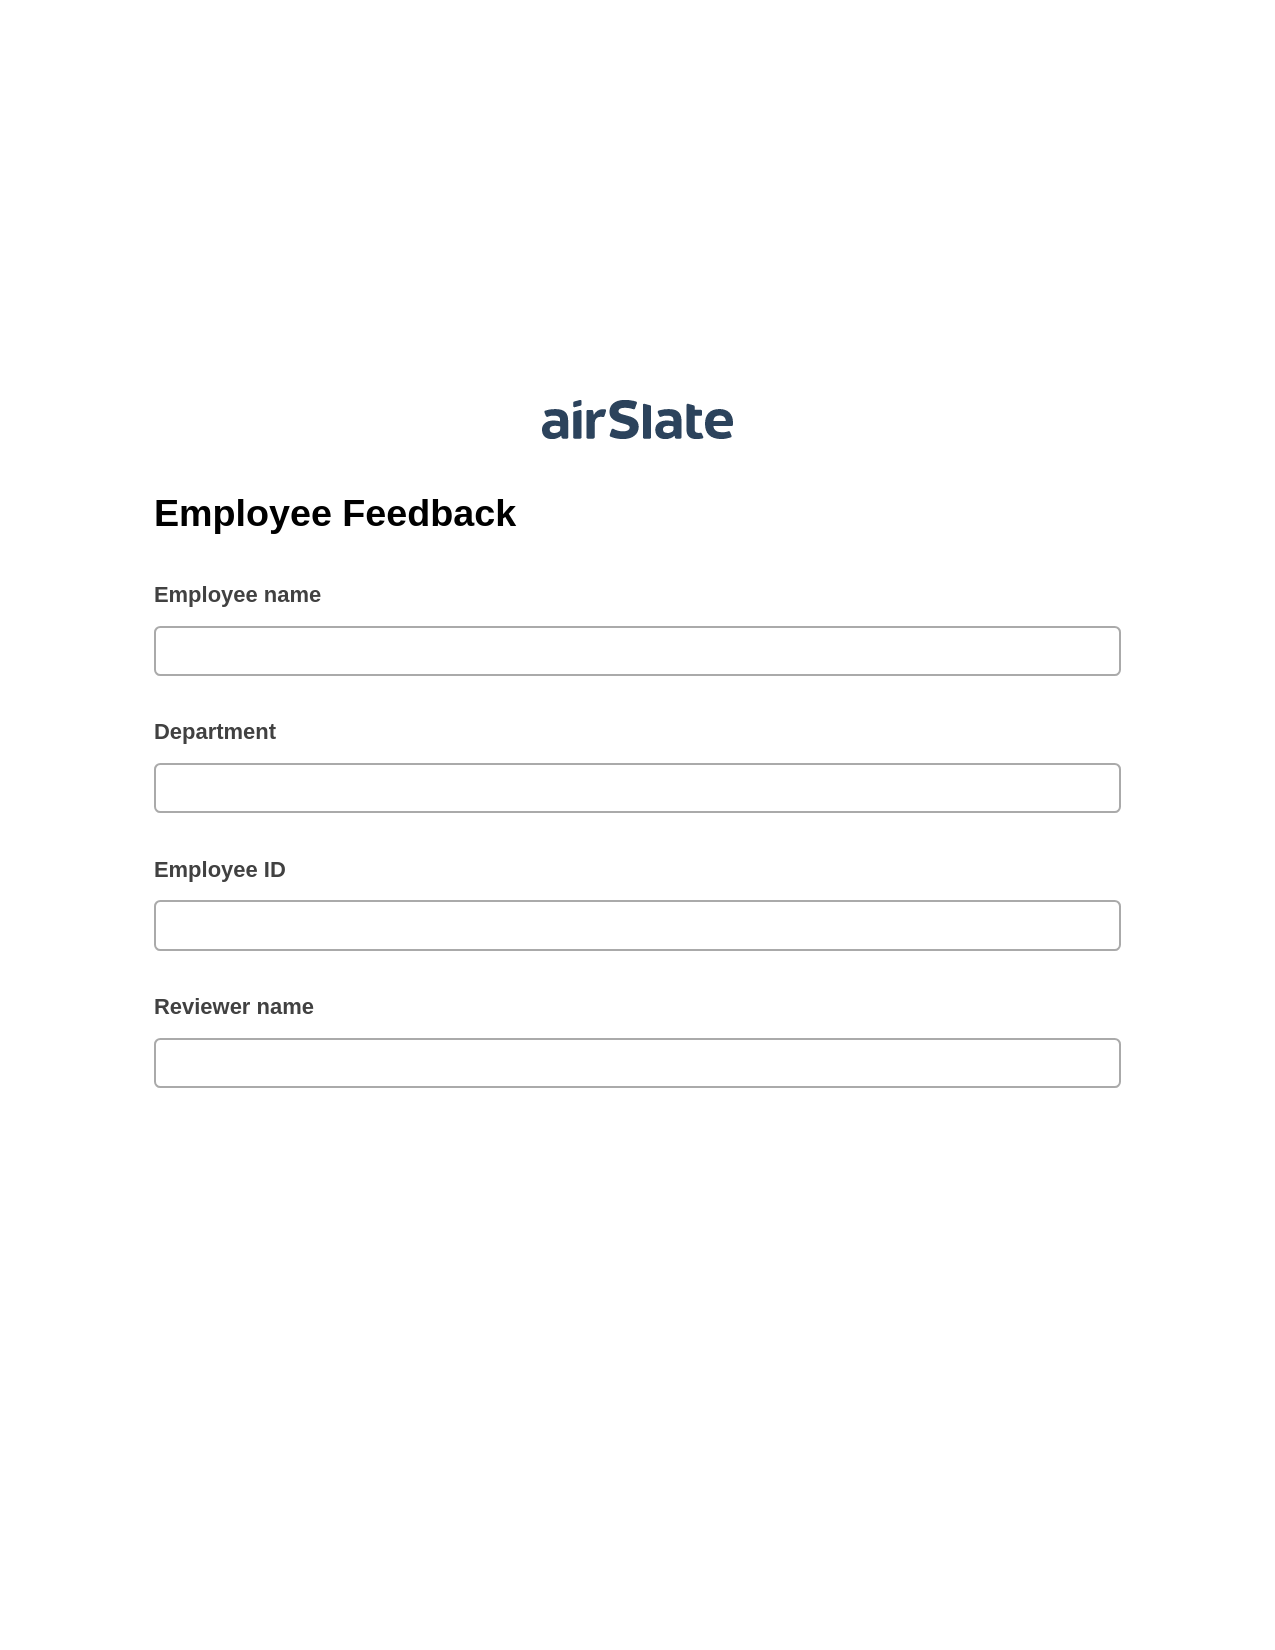 Employee Feedback Pre-fill Dropdown from Airtable, Add Tags to Slate Bot, Export to Excel 365 Bot